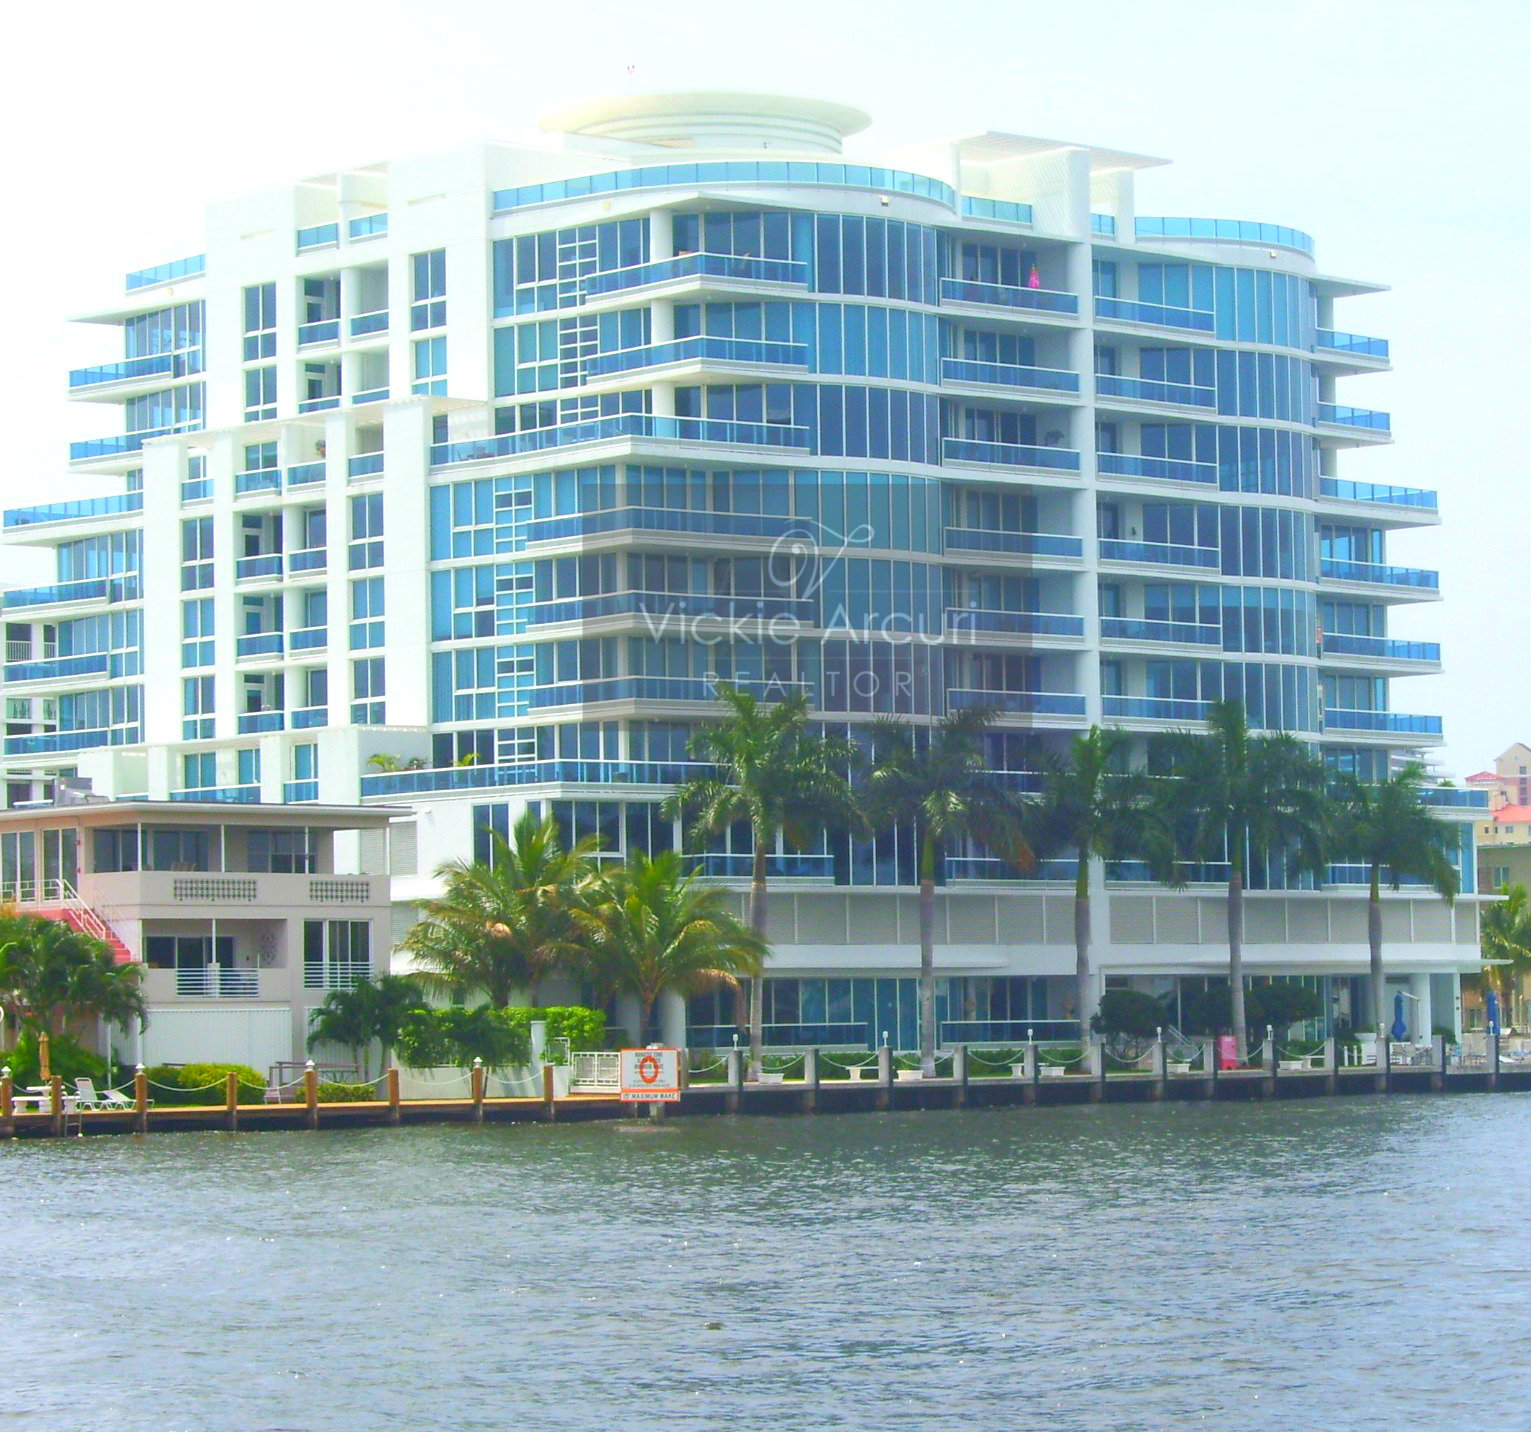 What's a good way to search for new condos in Ft. Lauderdale?